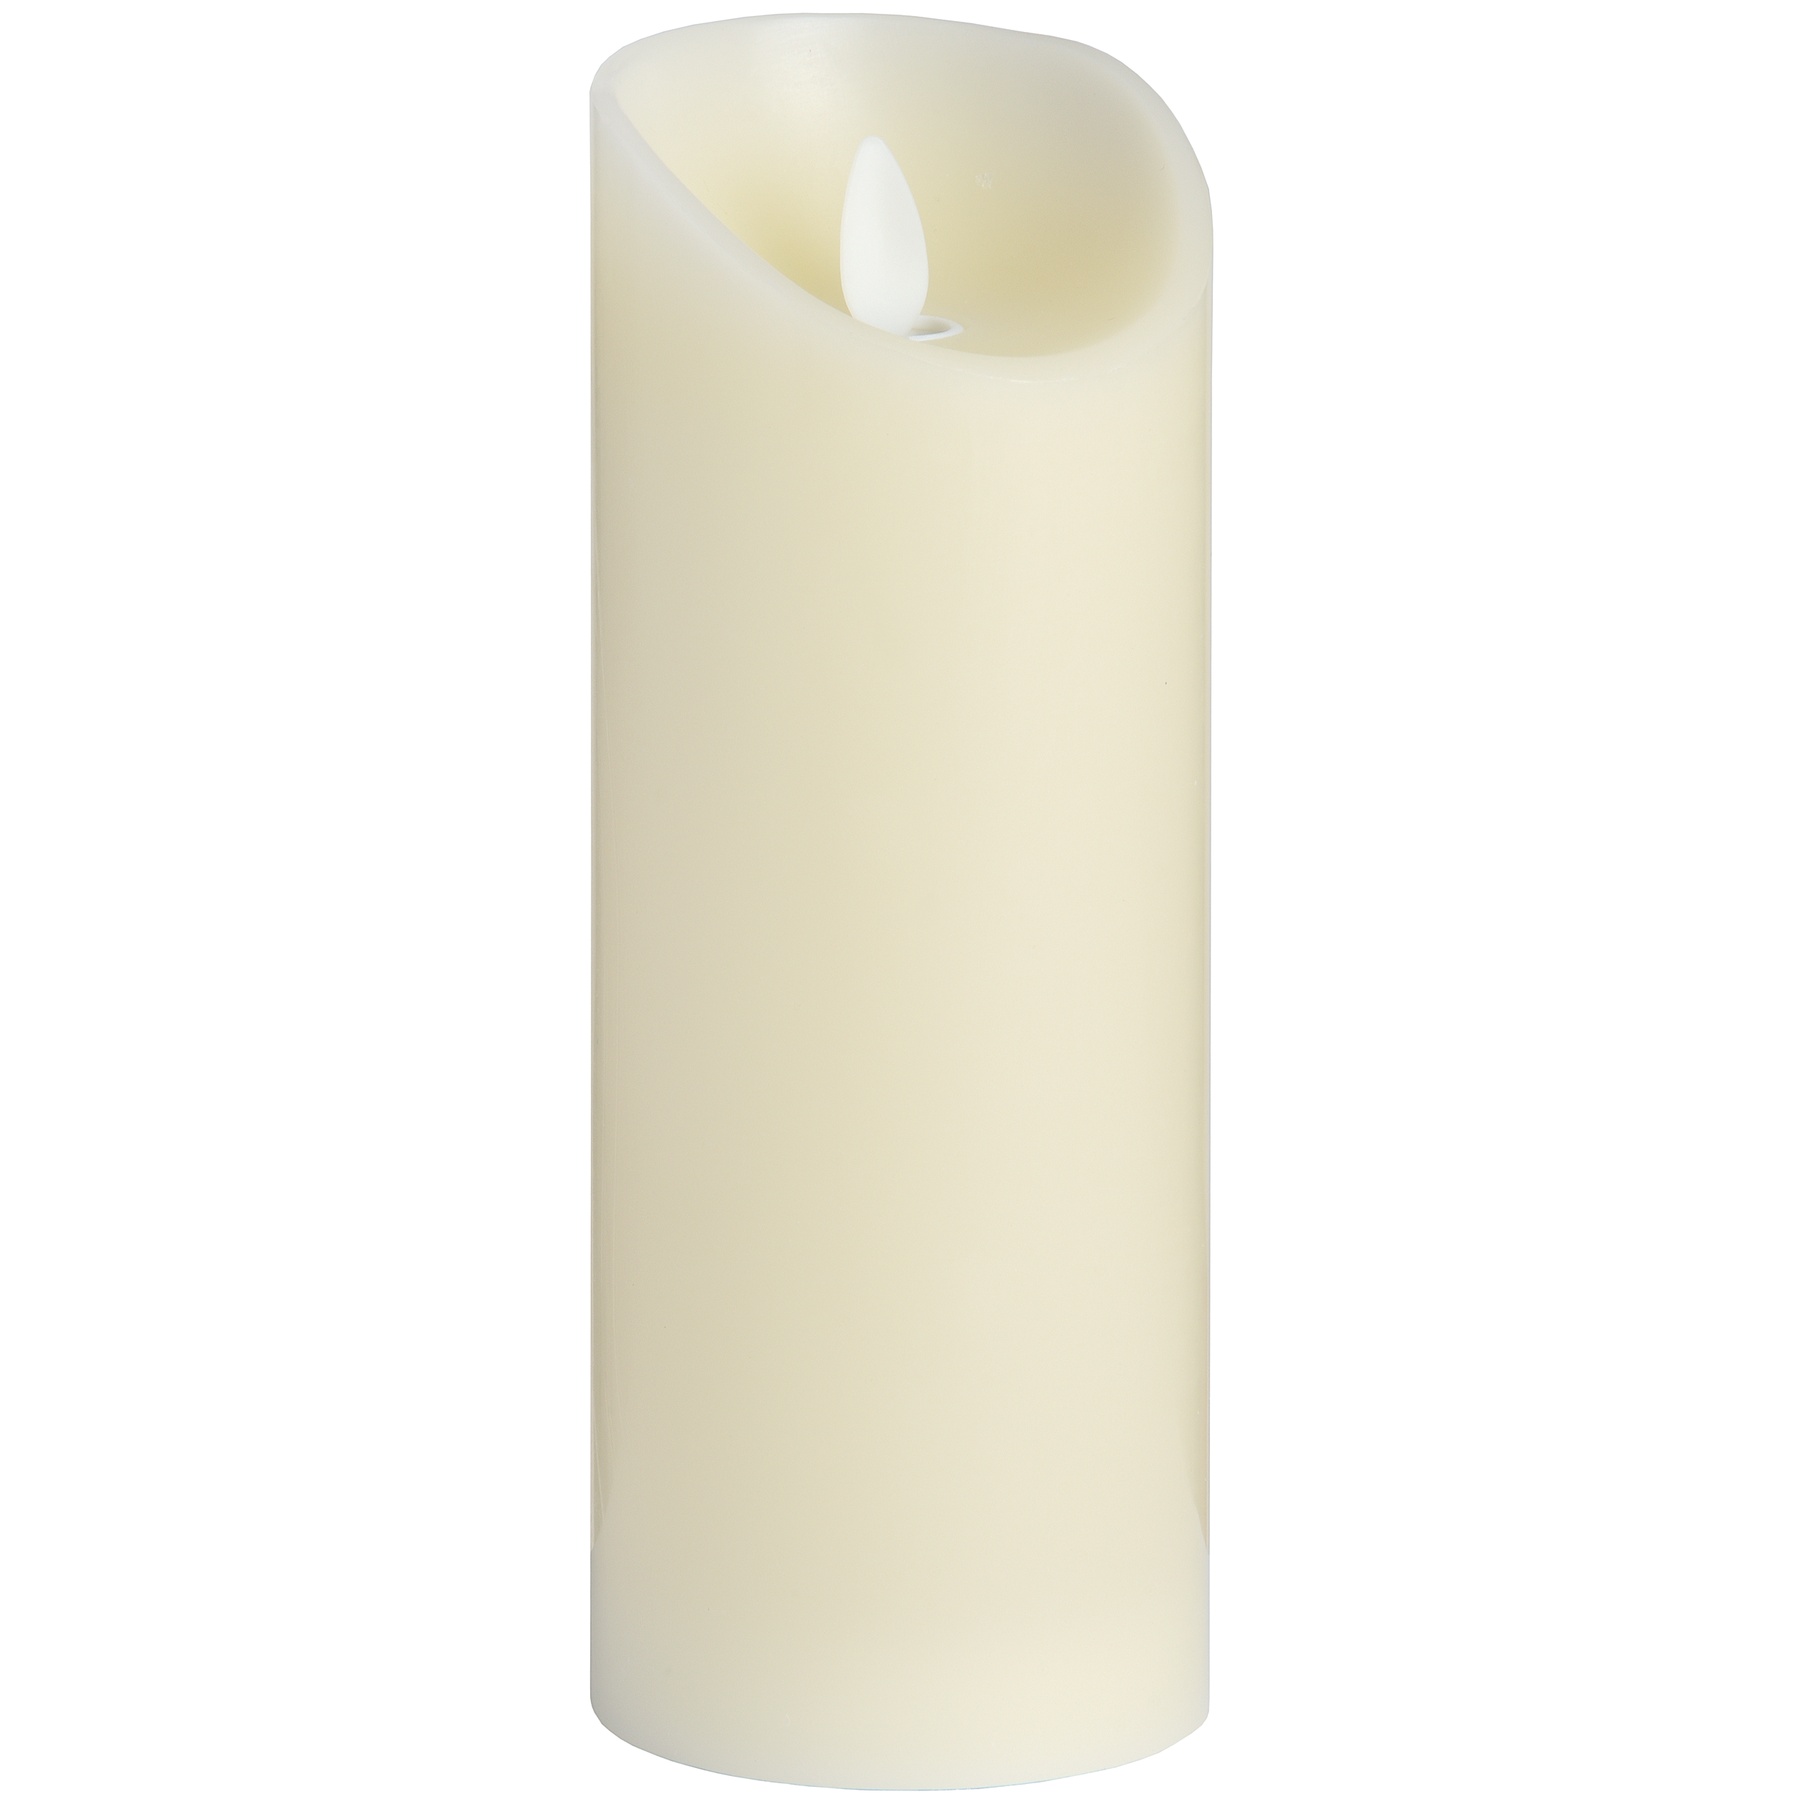 Luxe Collection 3 x 8 Cream Flickering Flame LED Wax Candle - Image 1